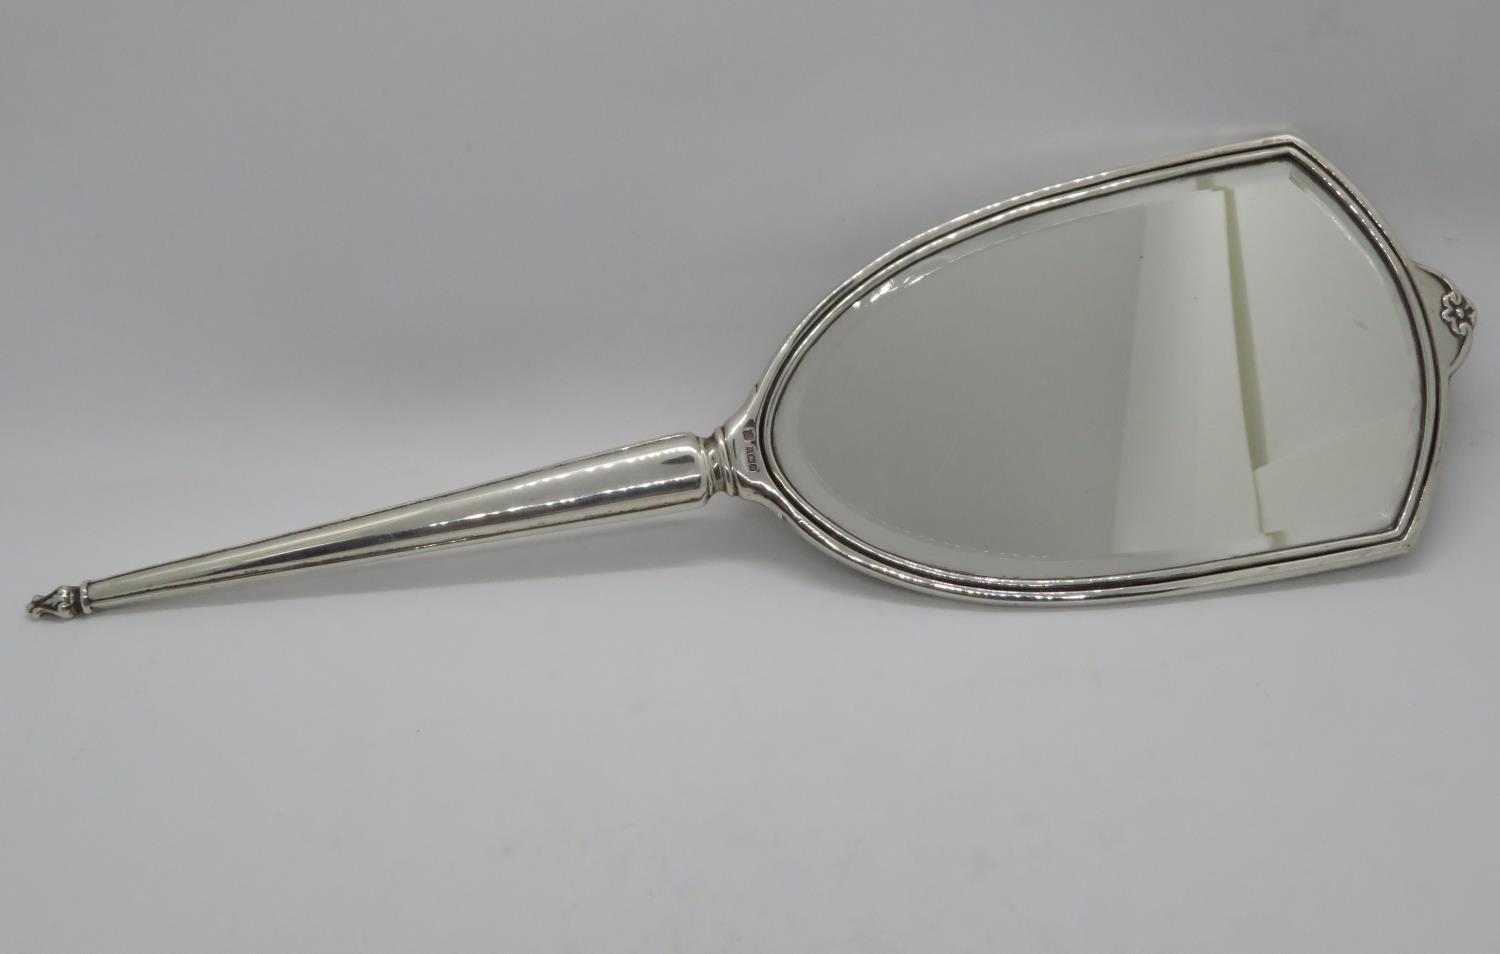 Vintage silver dressing table mirror by Charles Green and Sons 1975 - Image 2 of 3